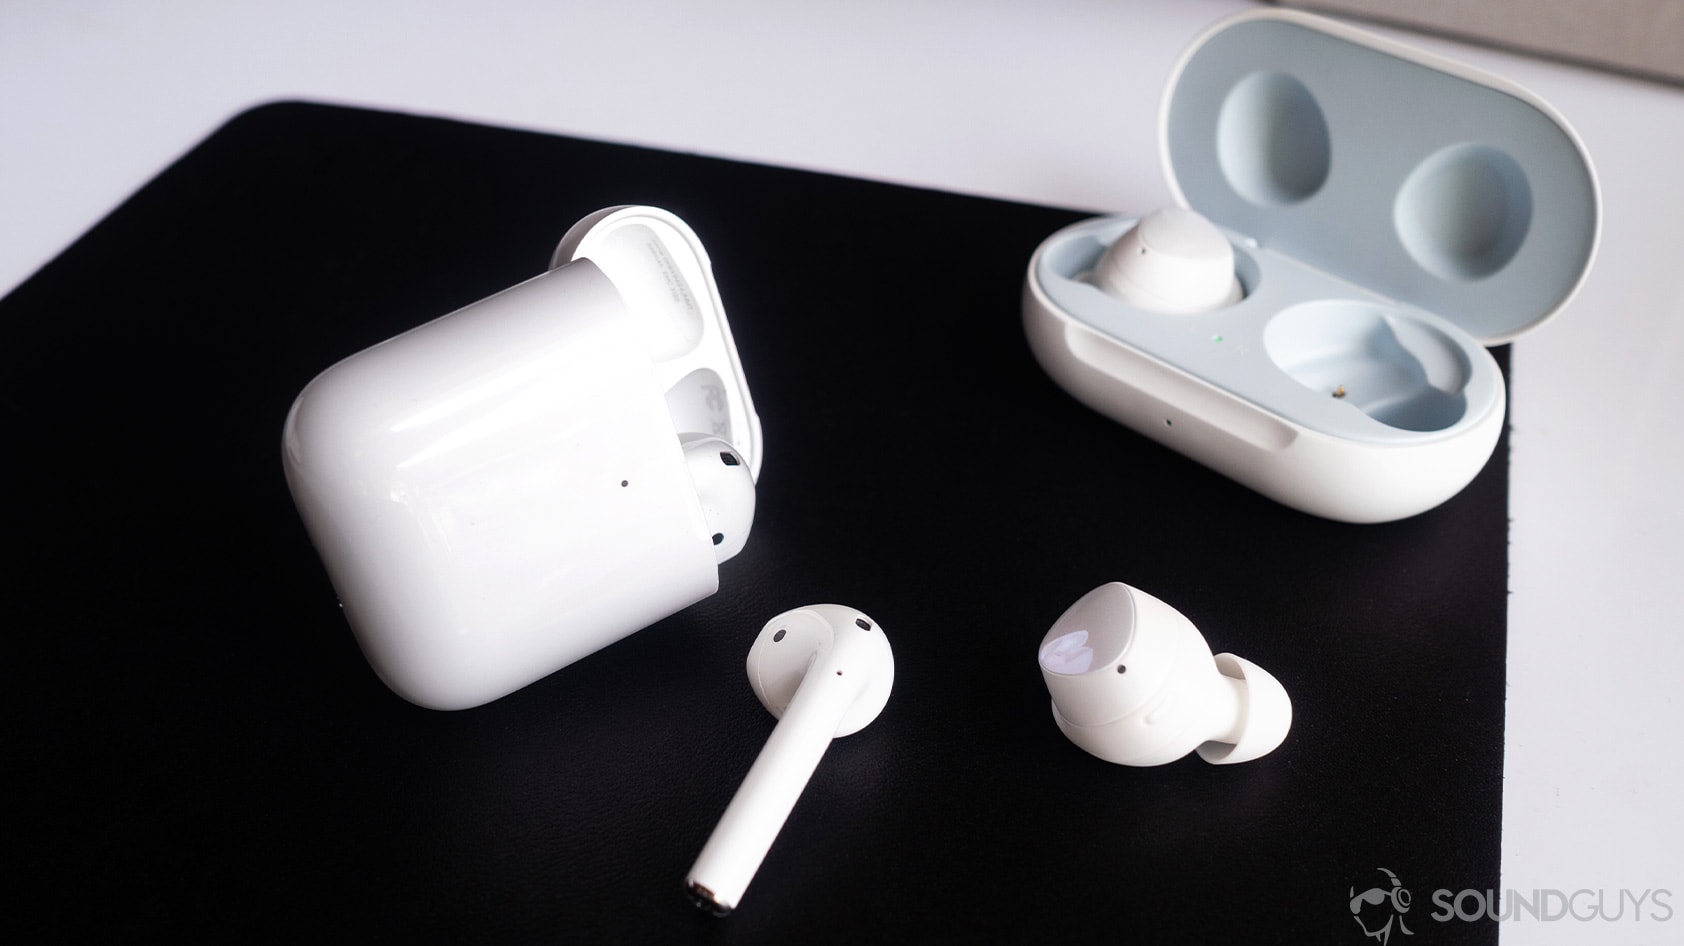 new AirPods (2019) and Samsung Galaxy Buds adjacent to one another on a table.